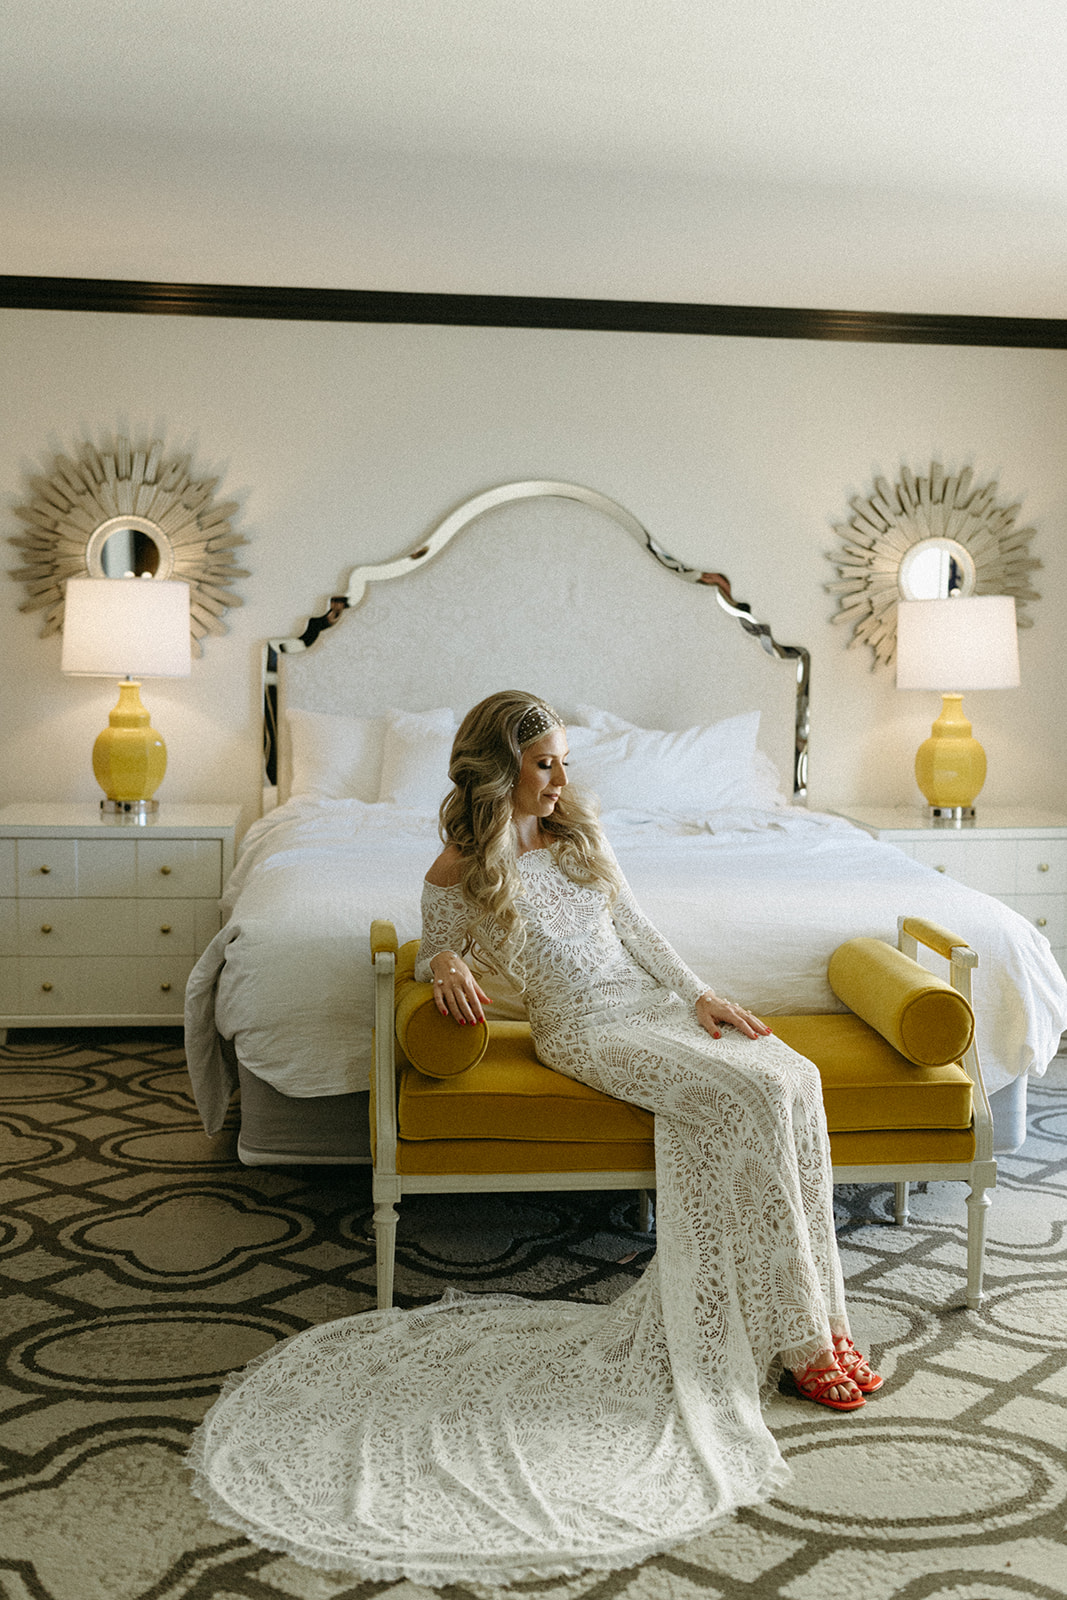 The bride lounged back on a yellow settees